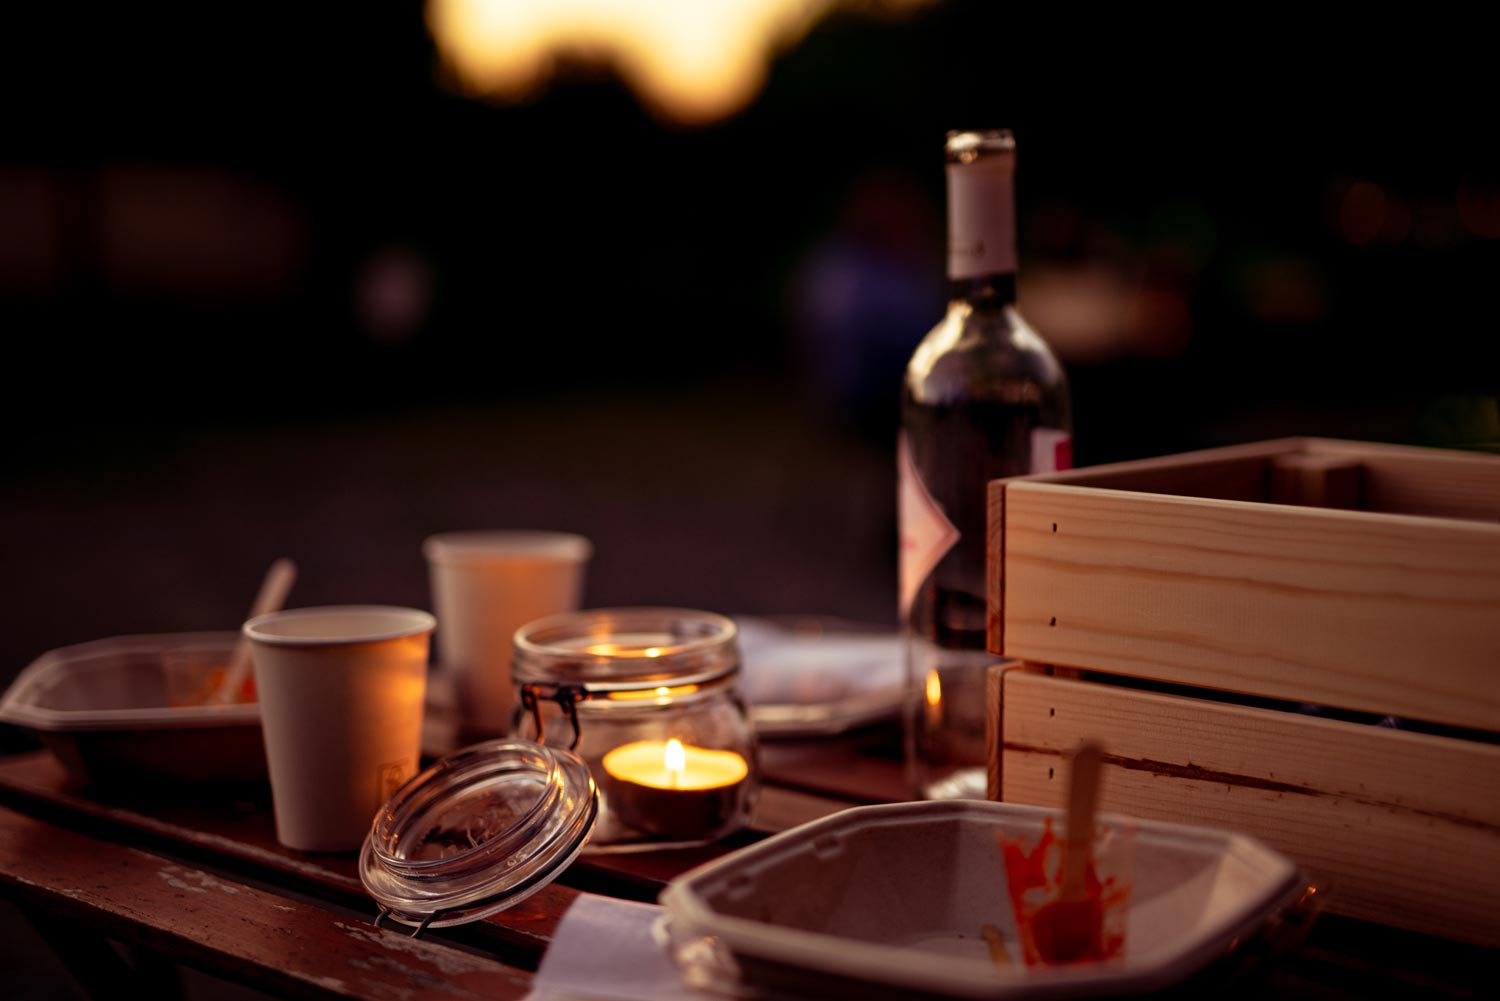 An outdoor table with candle and empty plates and empty bottle of wine